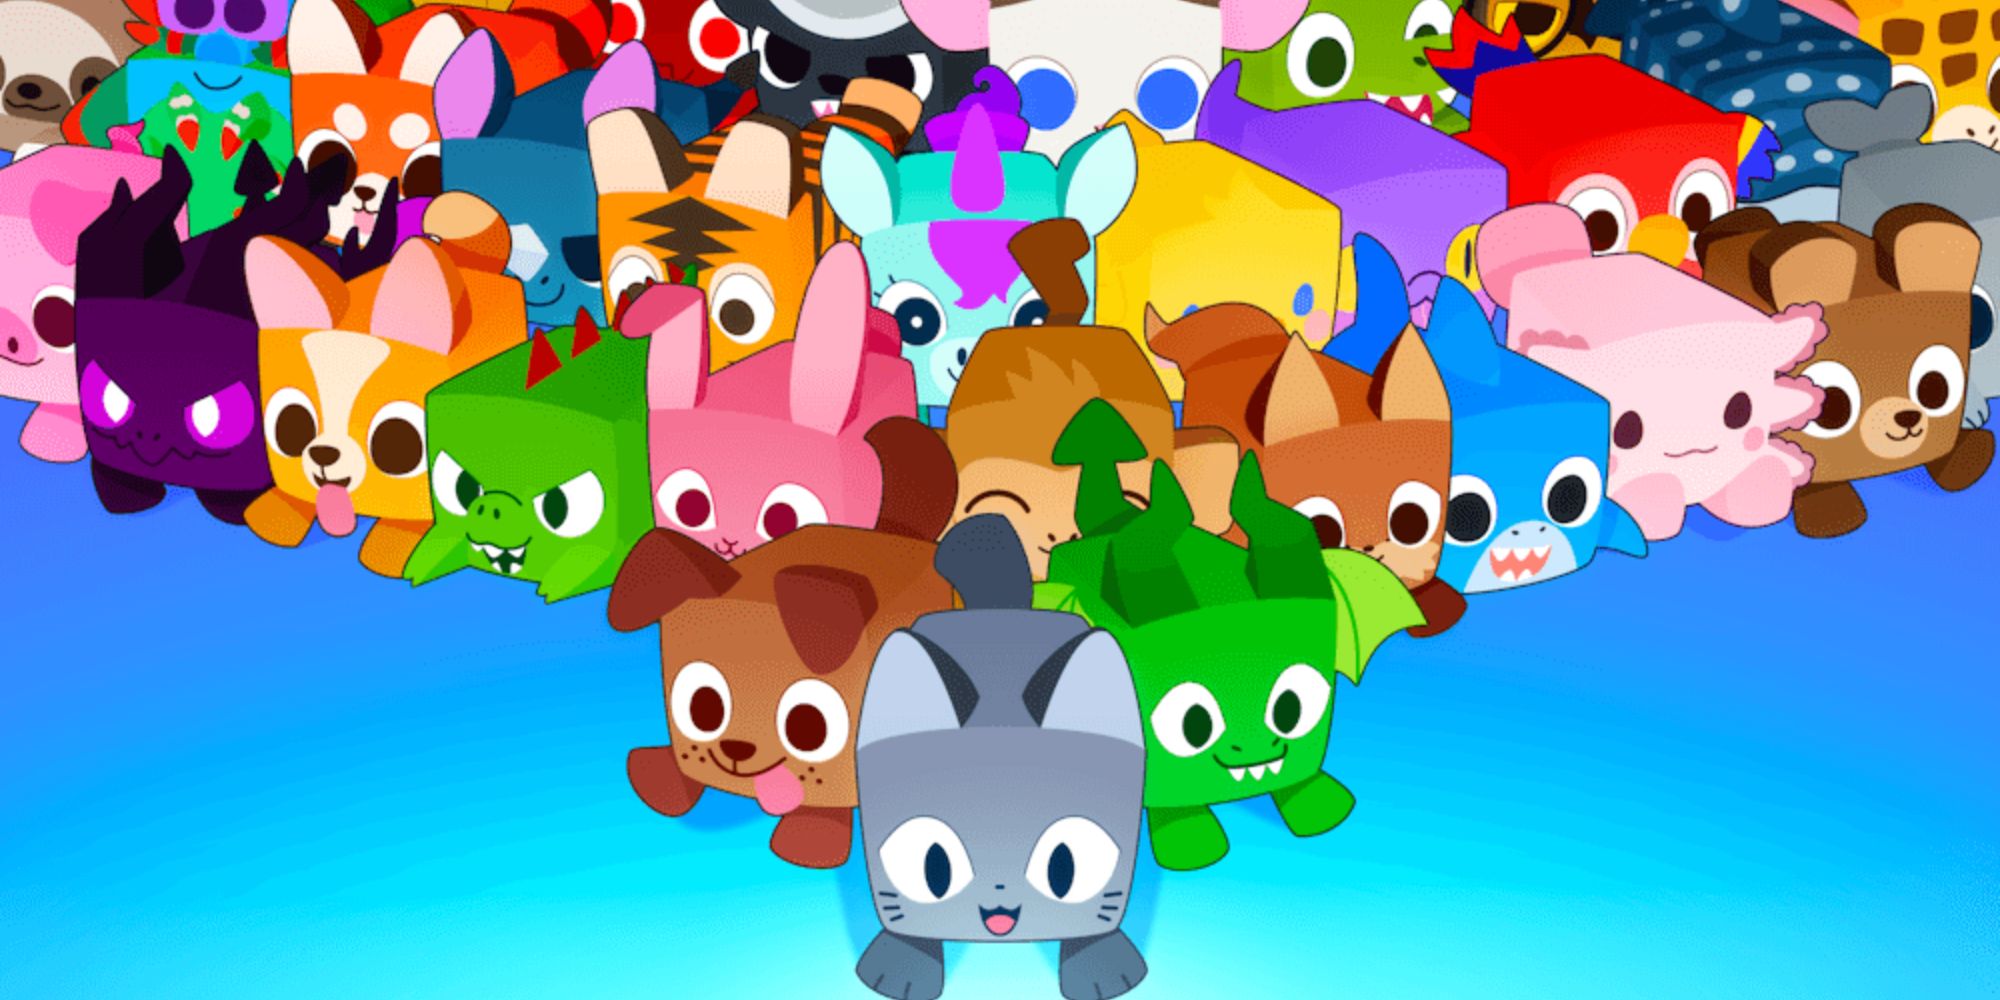 the official promo image for pet simulator 99, featuring a large group of pets led by a cat